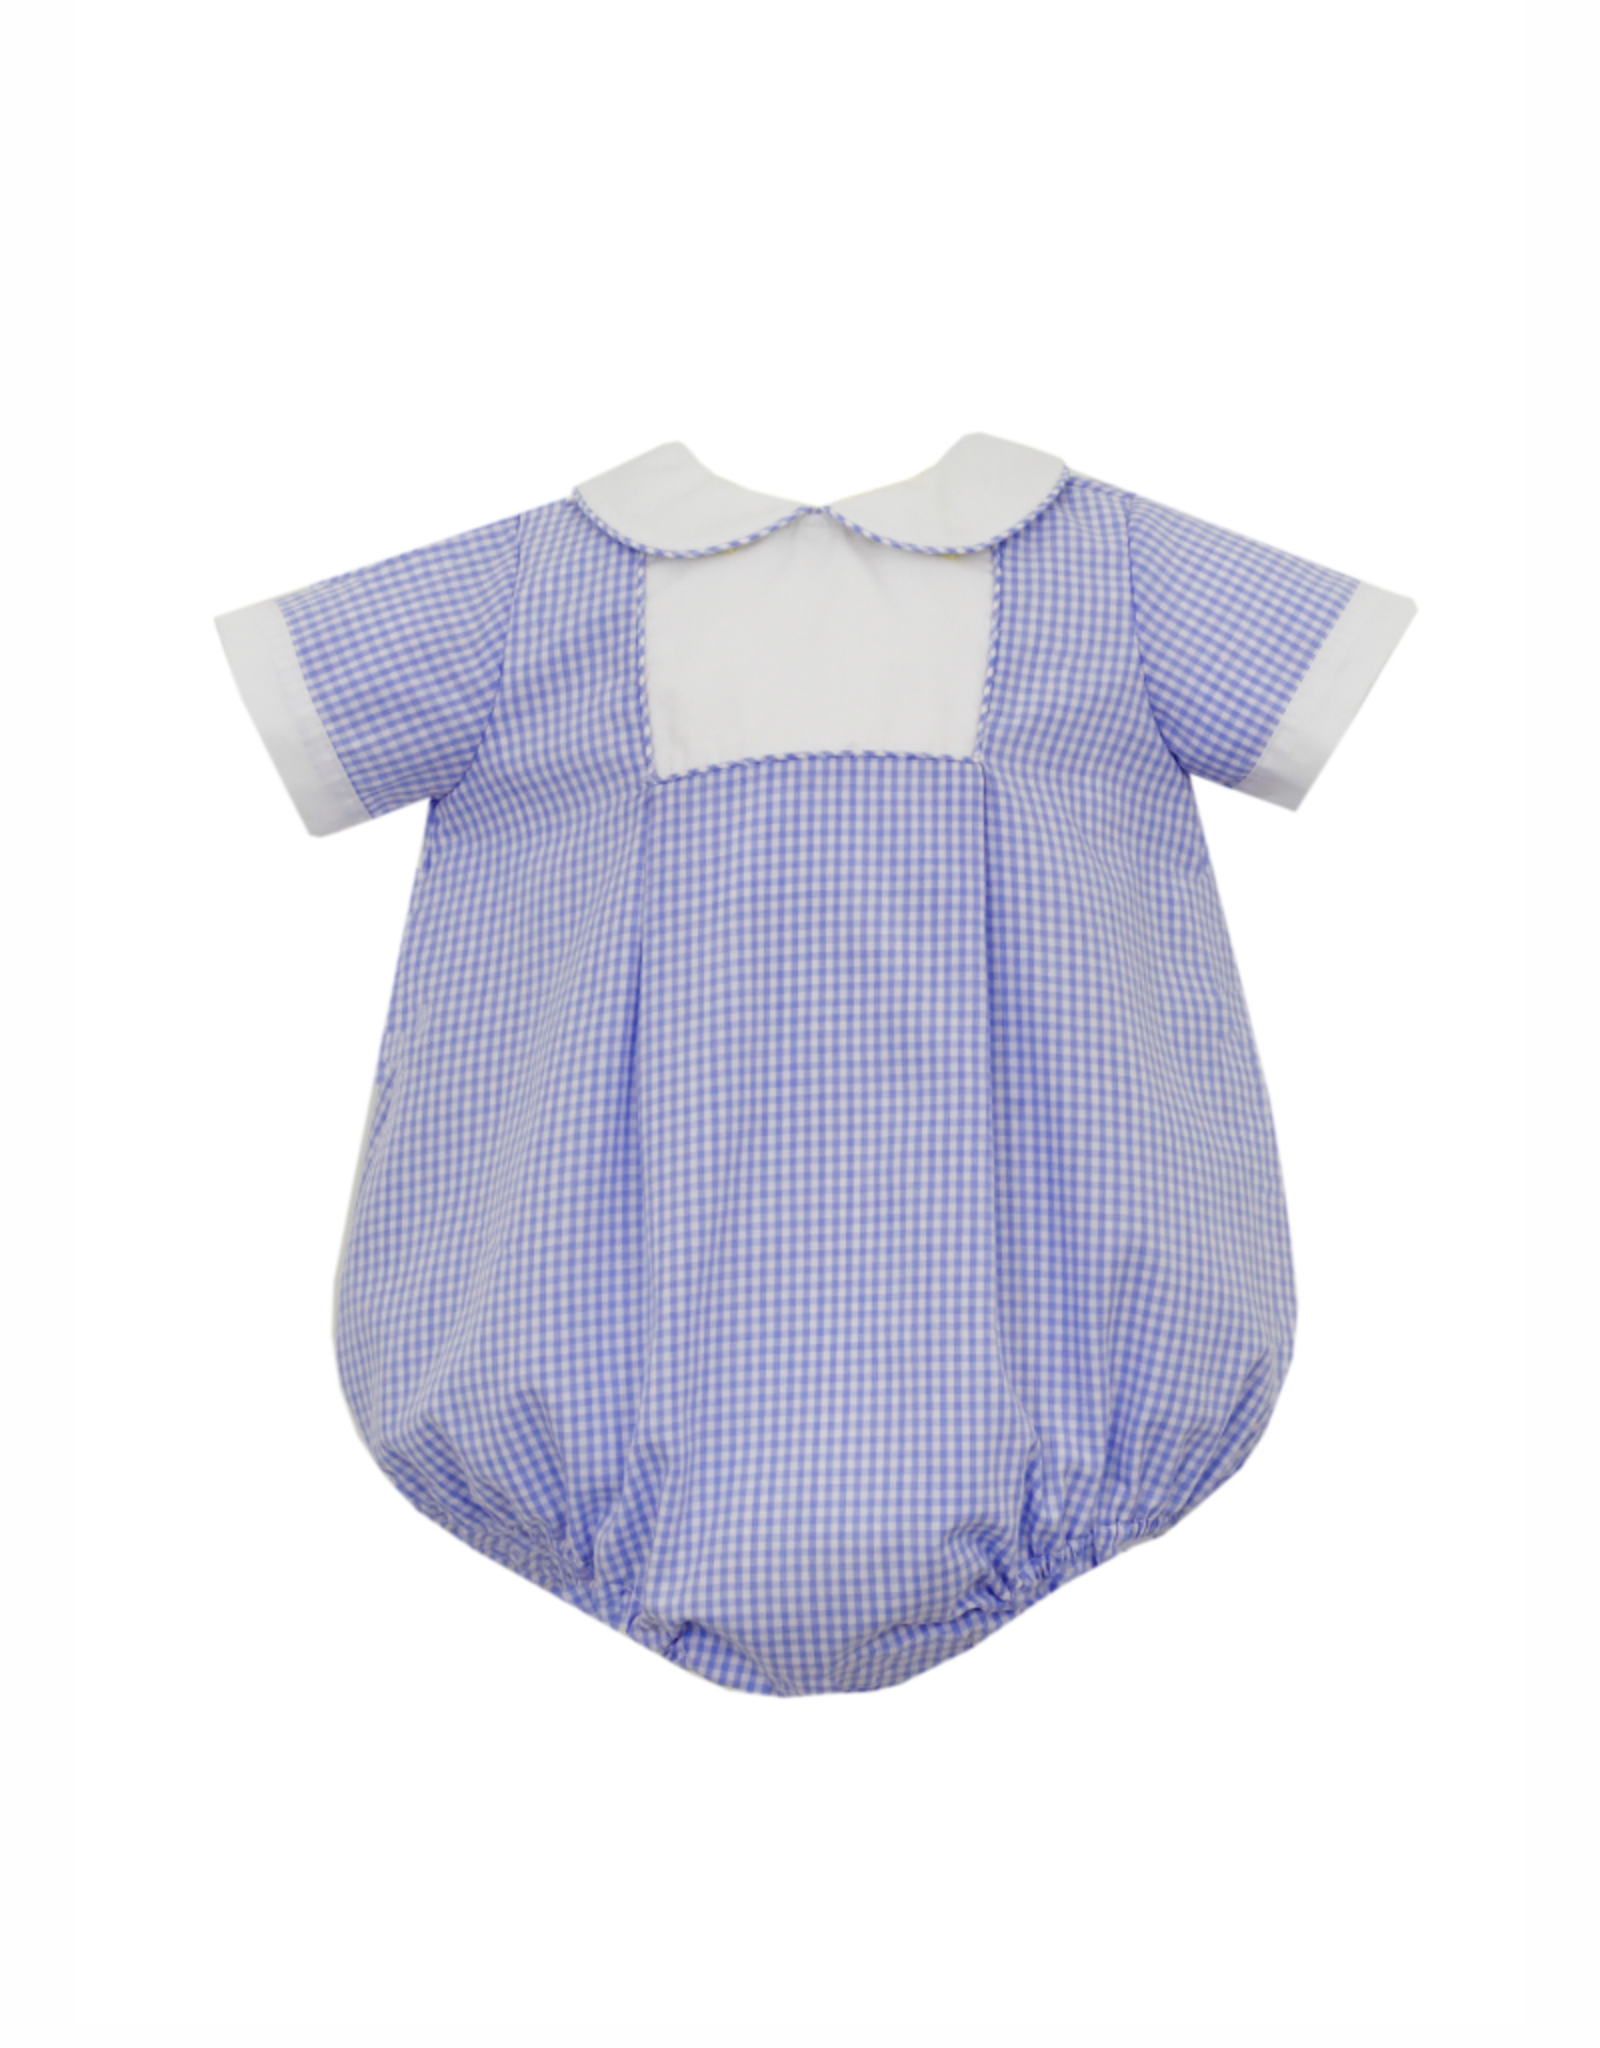 Claire and Charlie Blue Gingham Boys Bubble with White Square